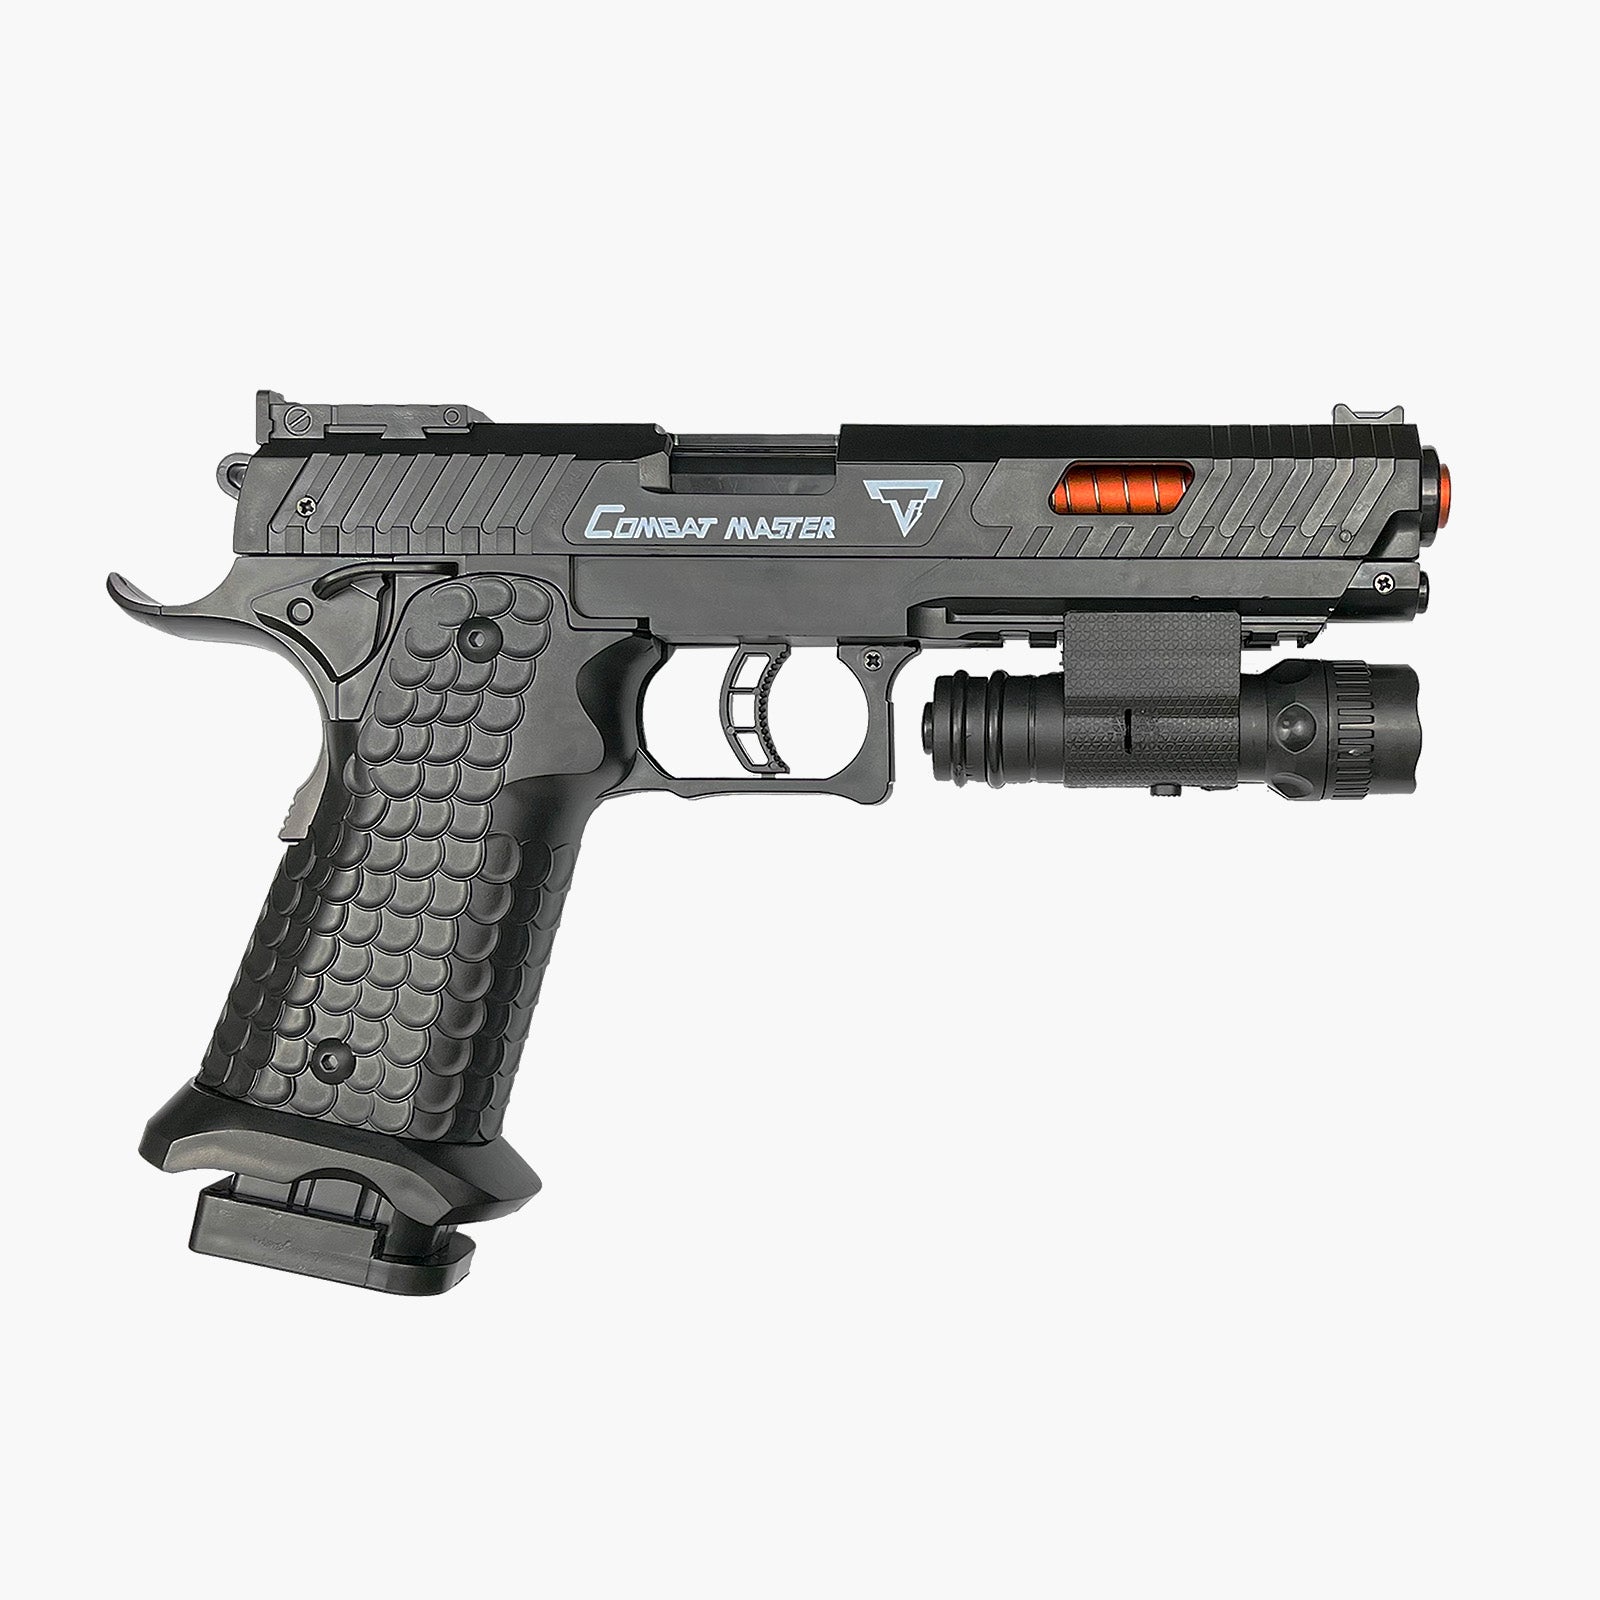 JW3 Combat Master 2011 Blowback Pistol with Shell Ejecting